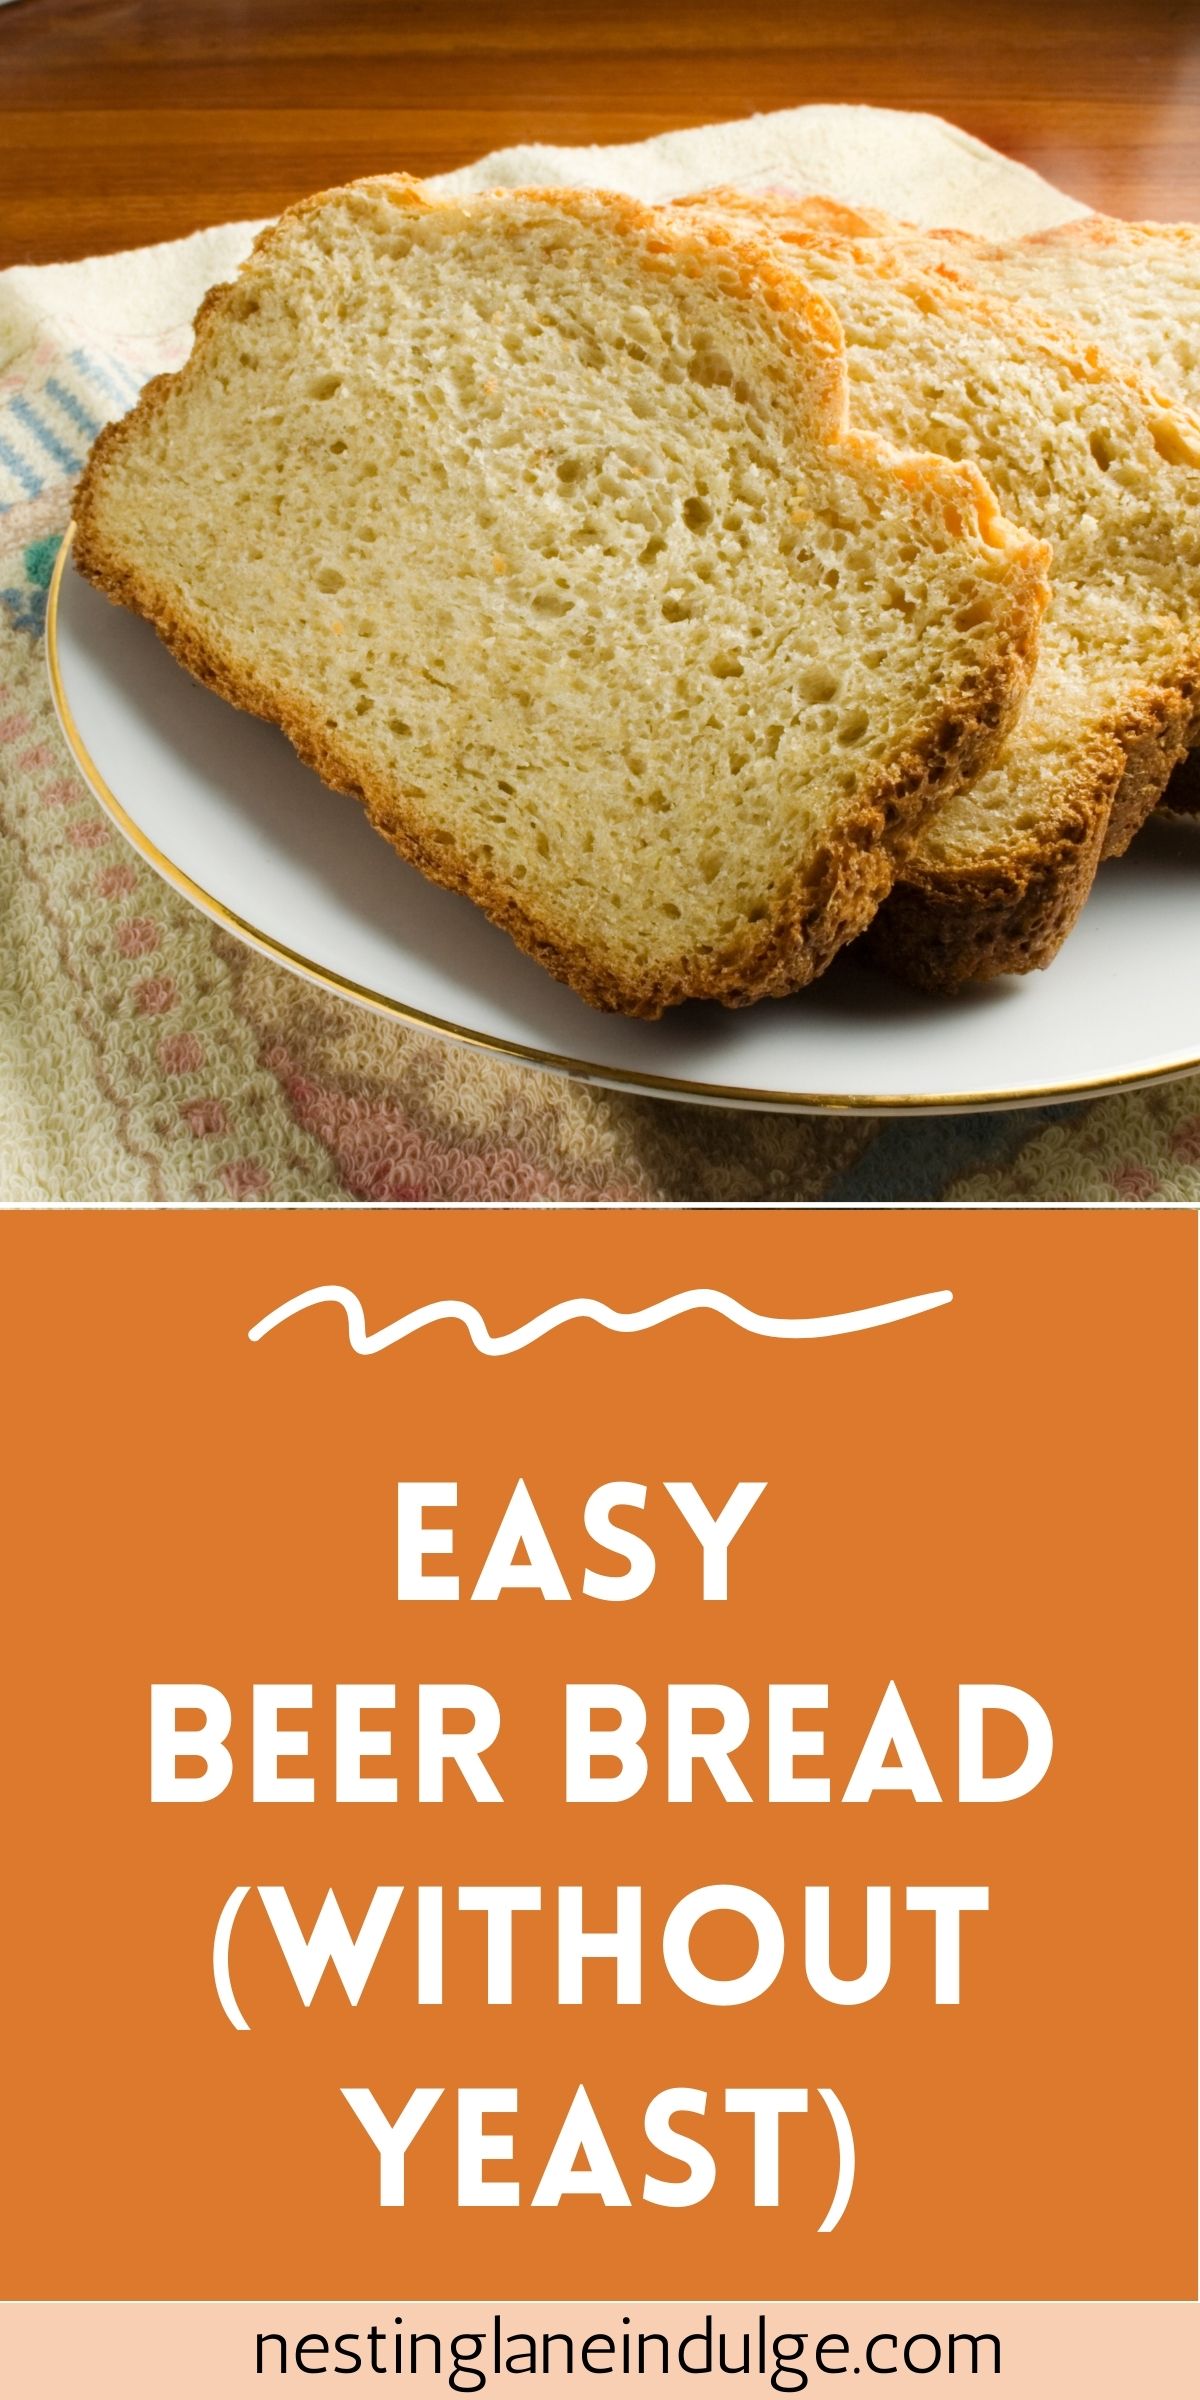 Graphic for Pinterest of Easy Beer Bread (Without Yeast) Recipe.